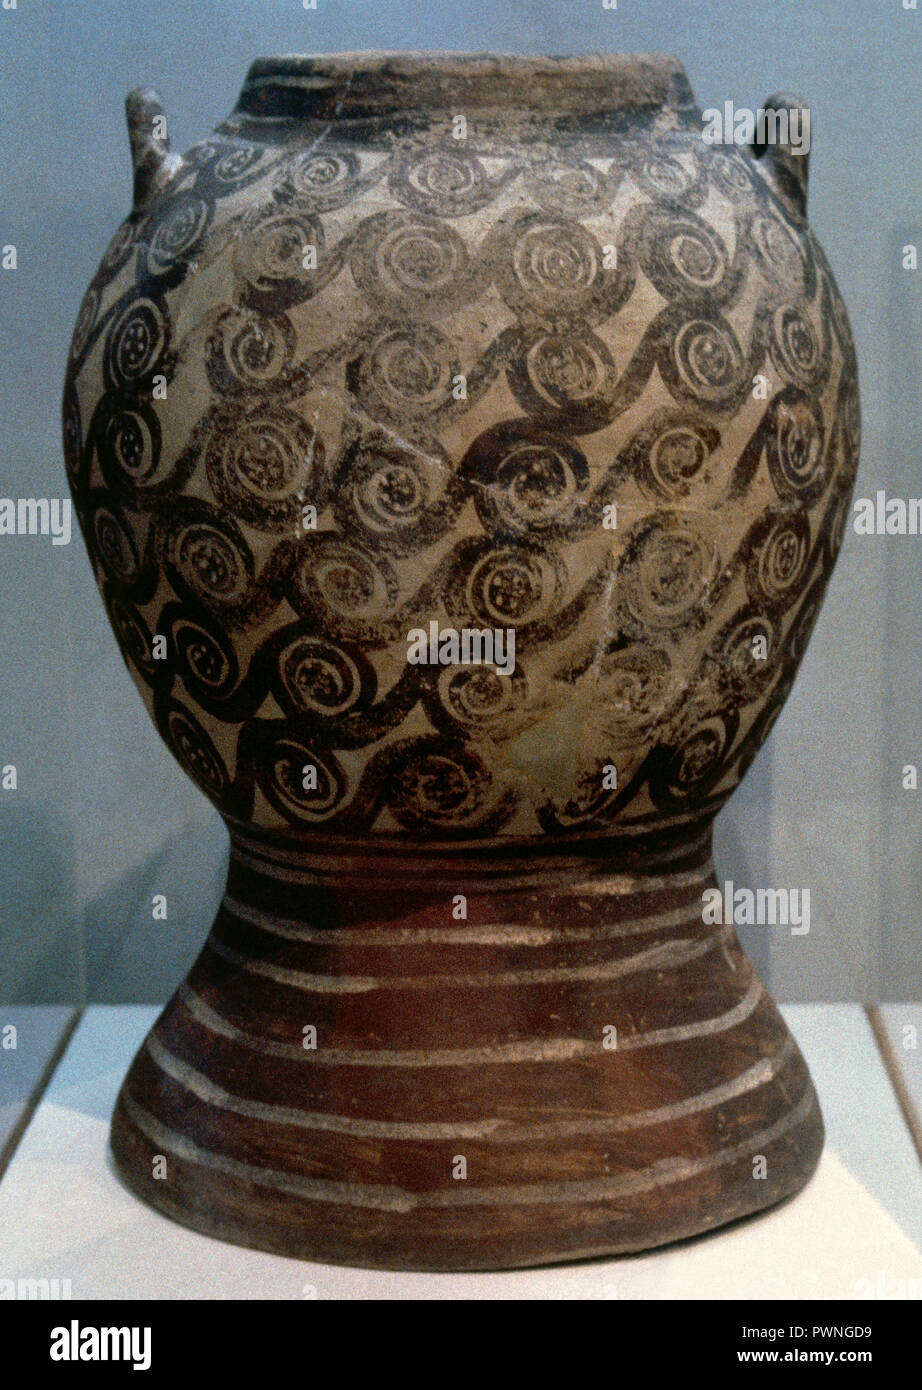 Ceramic pitcher with geometric decoration in the form of spirals. Second half of the 16th century BC. From Akrotiri (Thera). National Archaeological Museum. Athens, Greece. Stock Photo